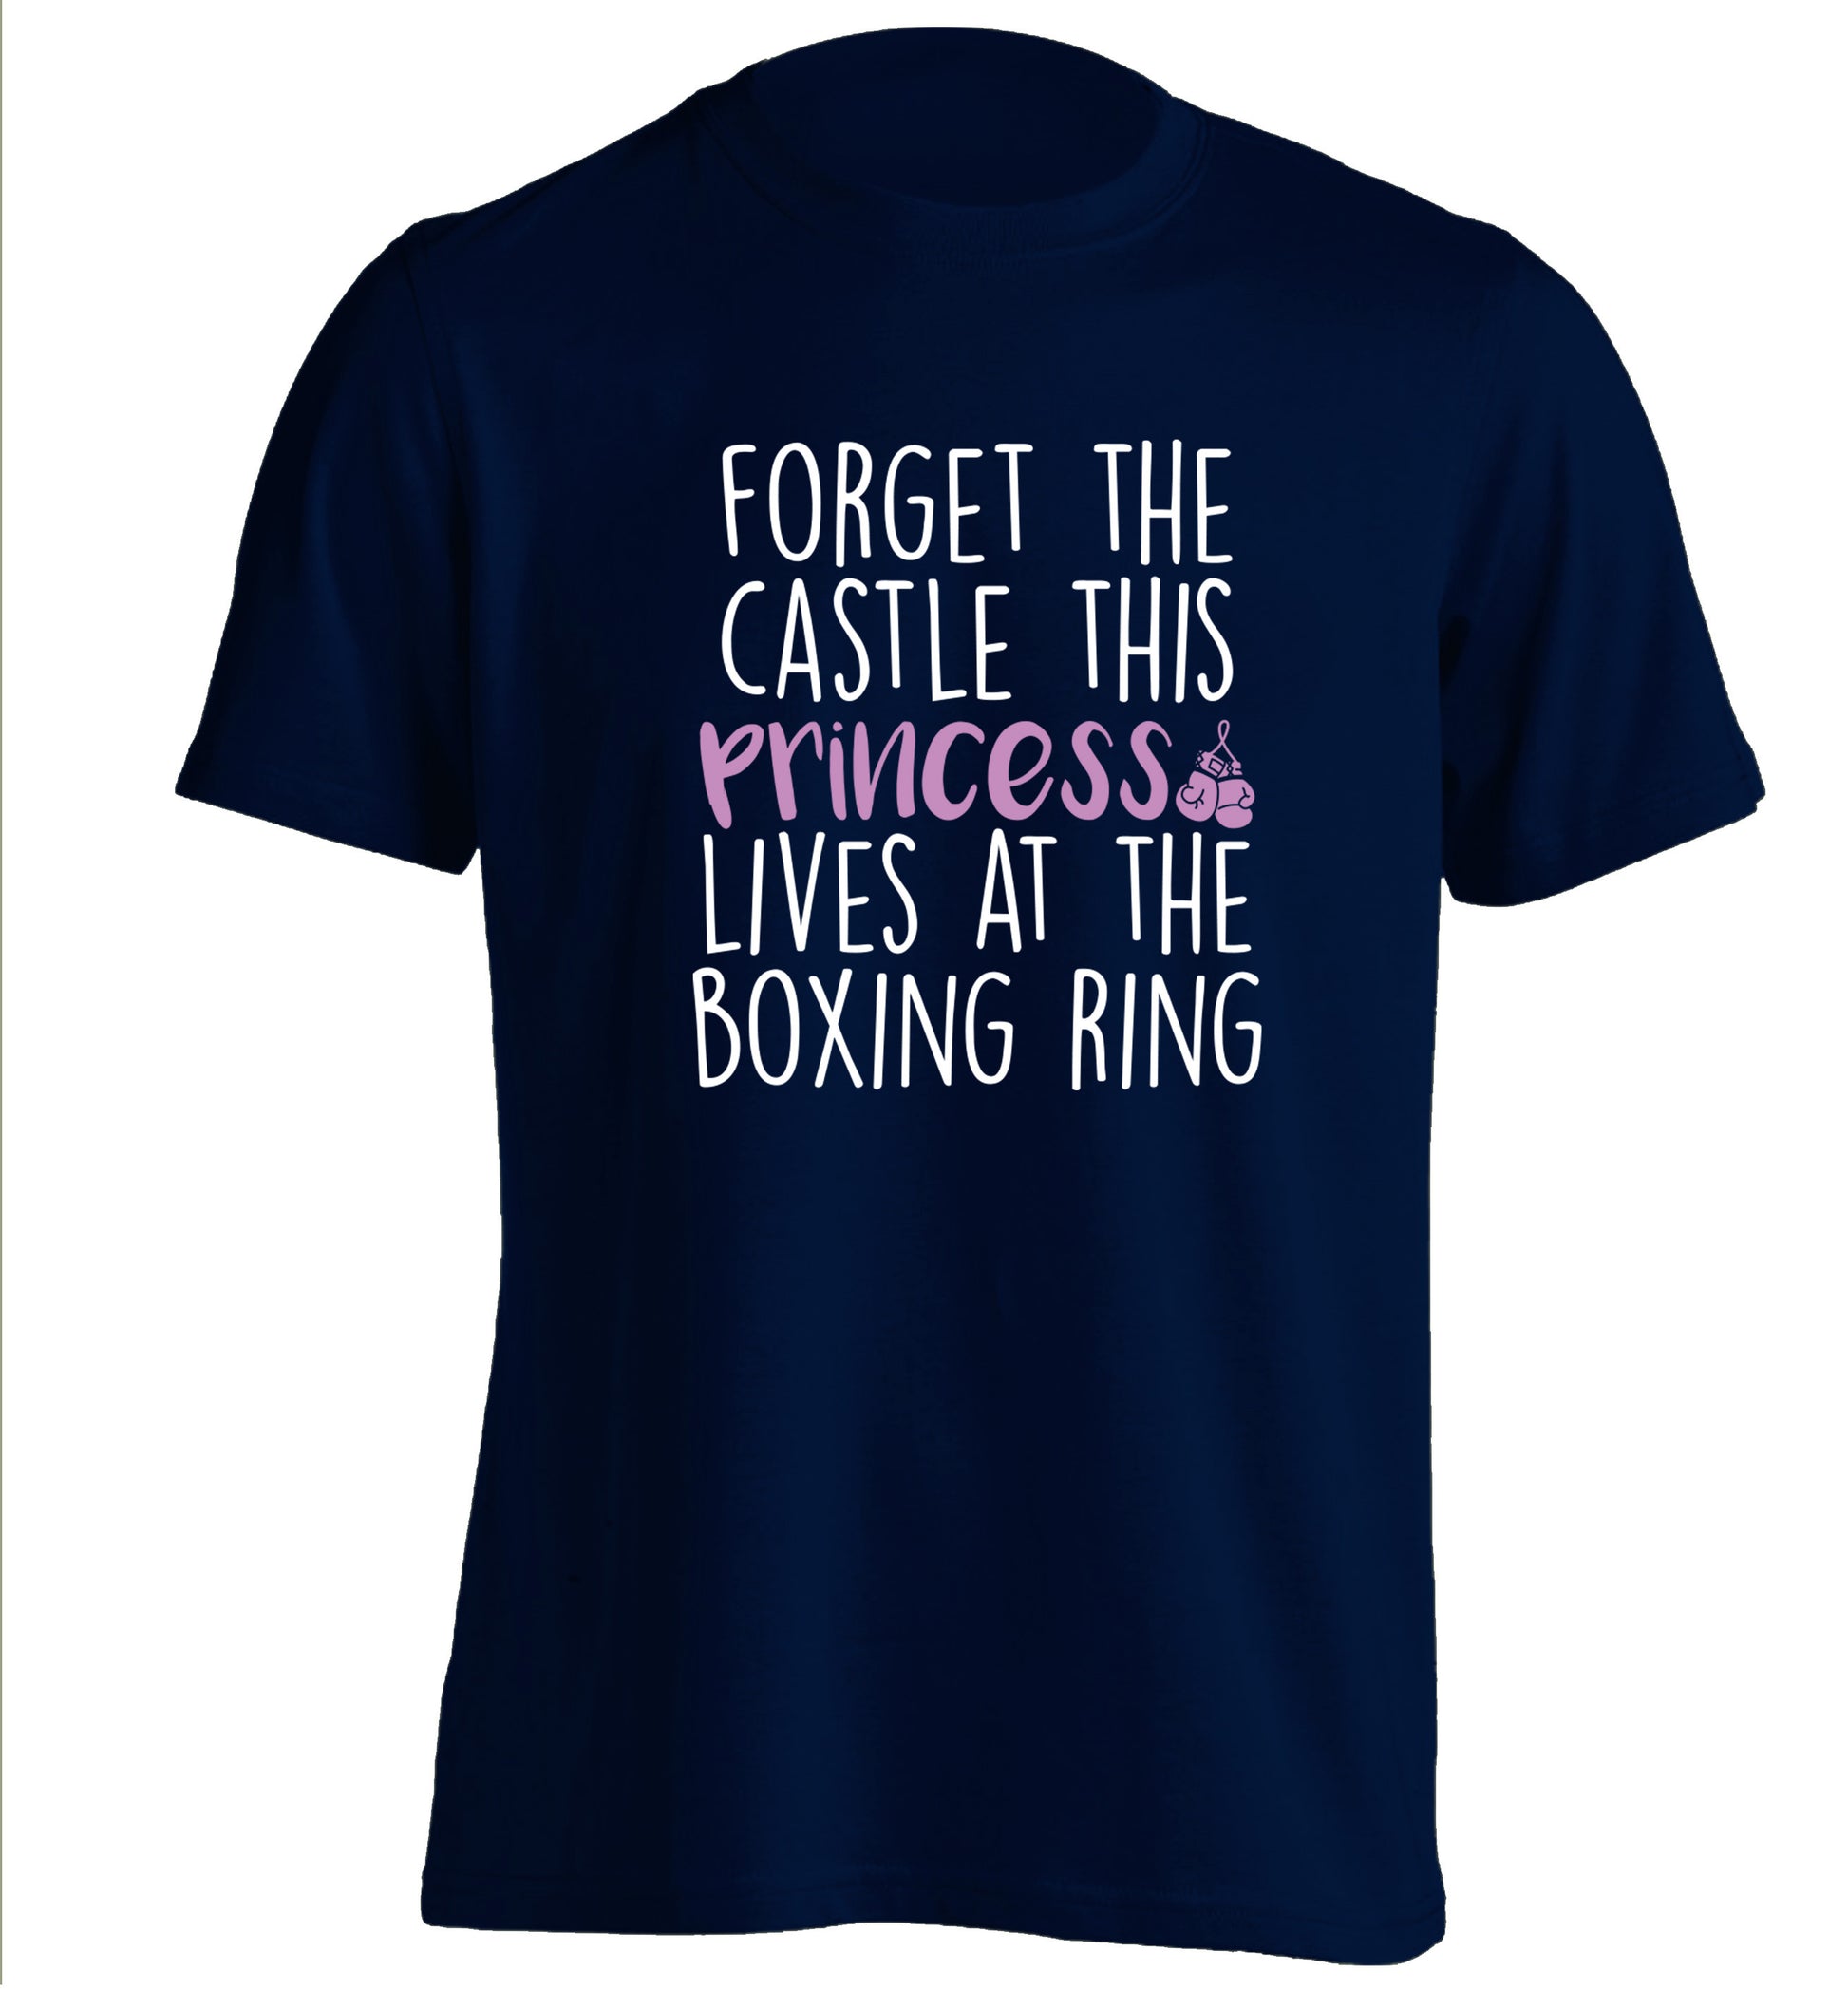 Forget the castle this princess lives at the boxing ring adults unisex navy Tshirt 2XL